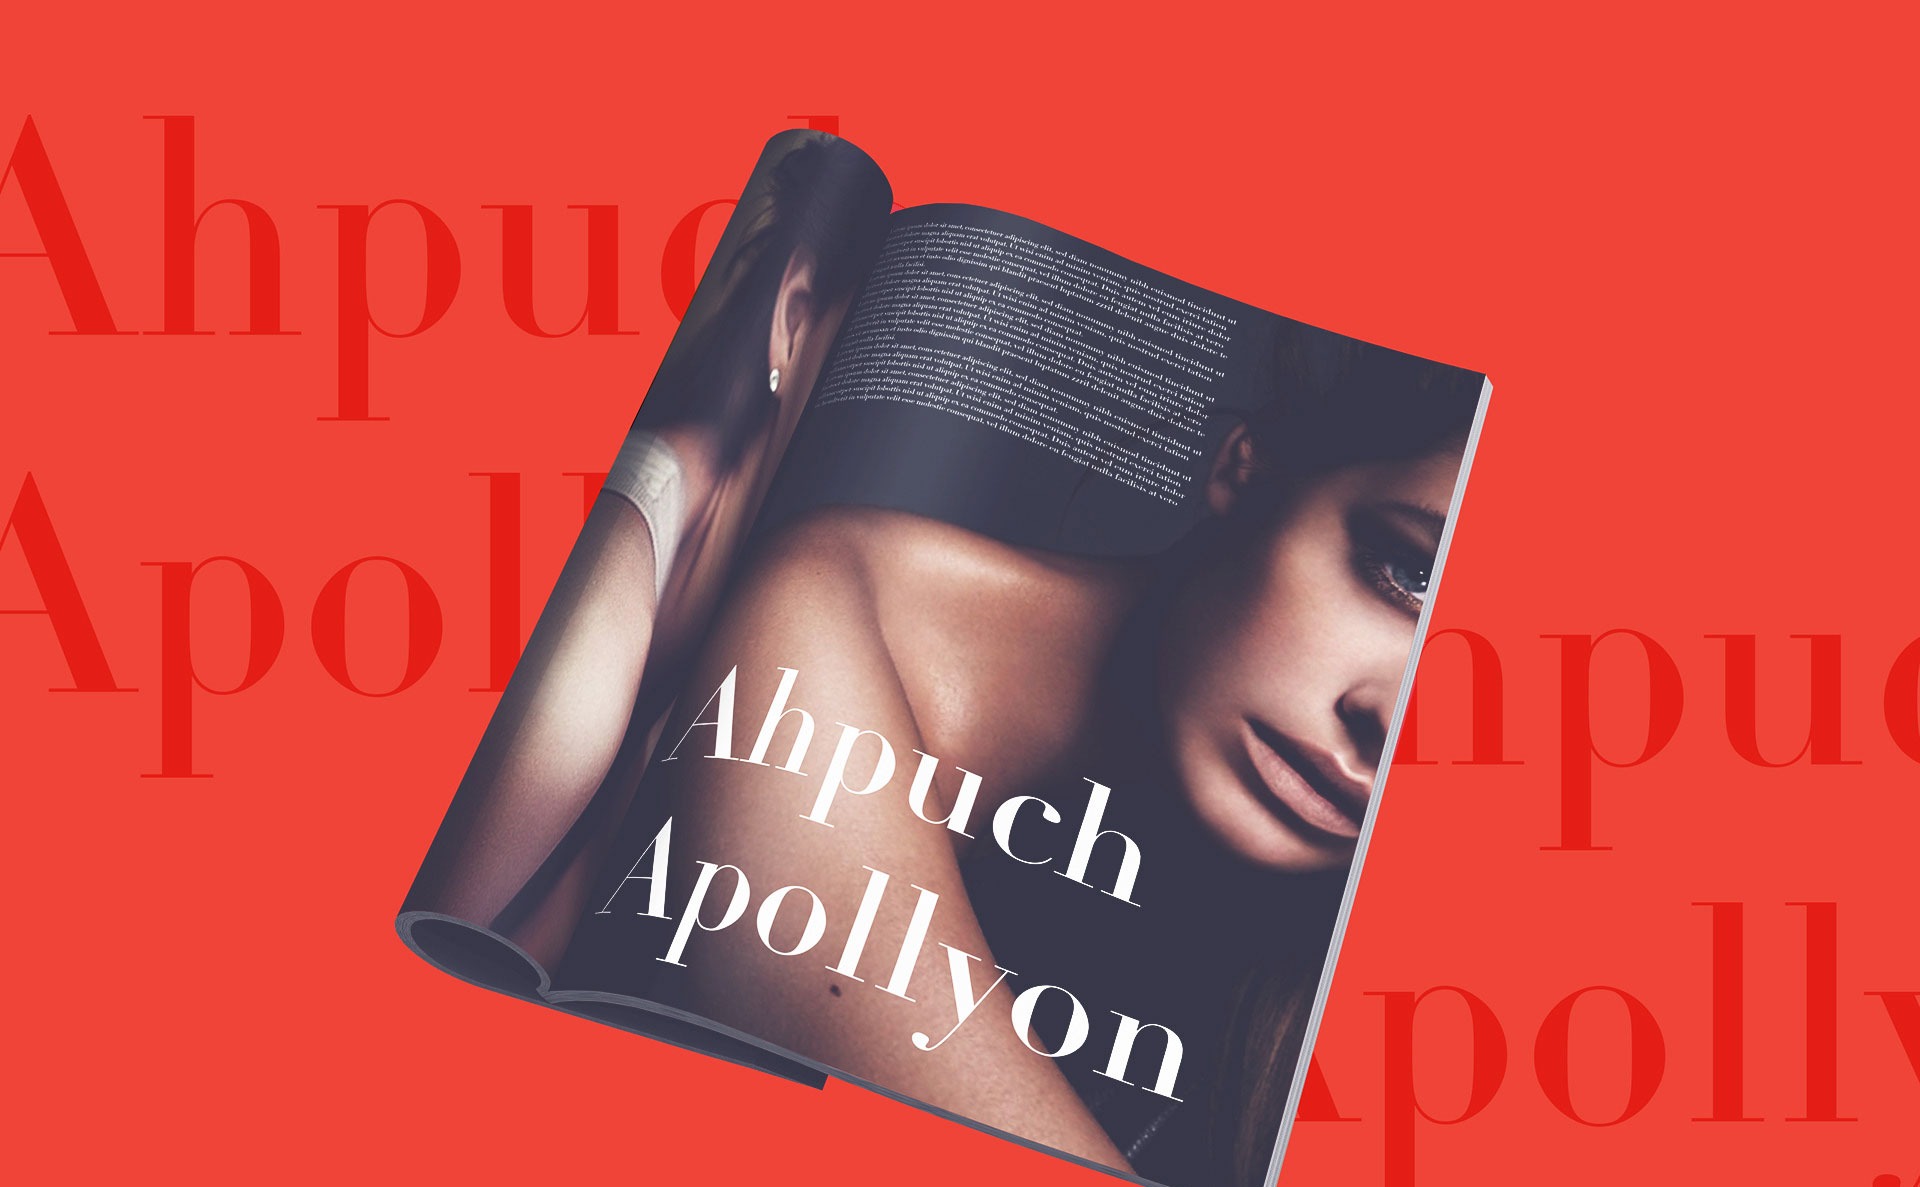 Example font Ahpuch Apollyon #6